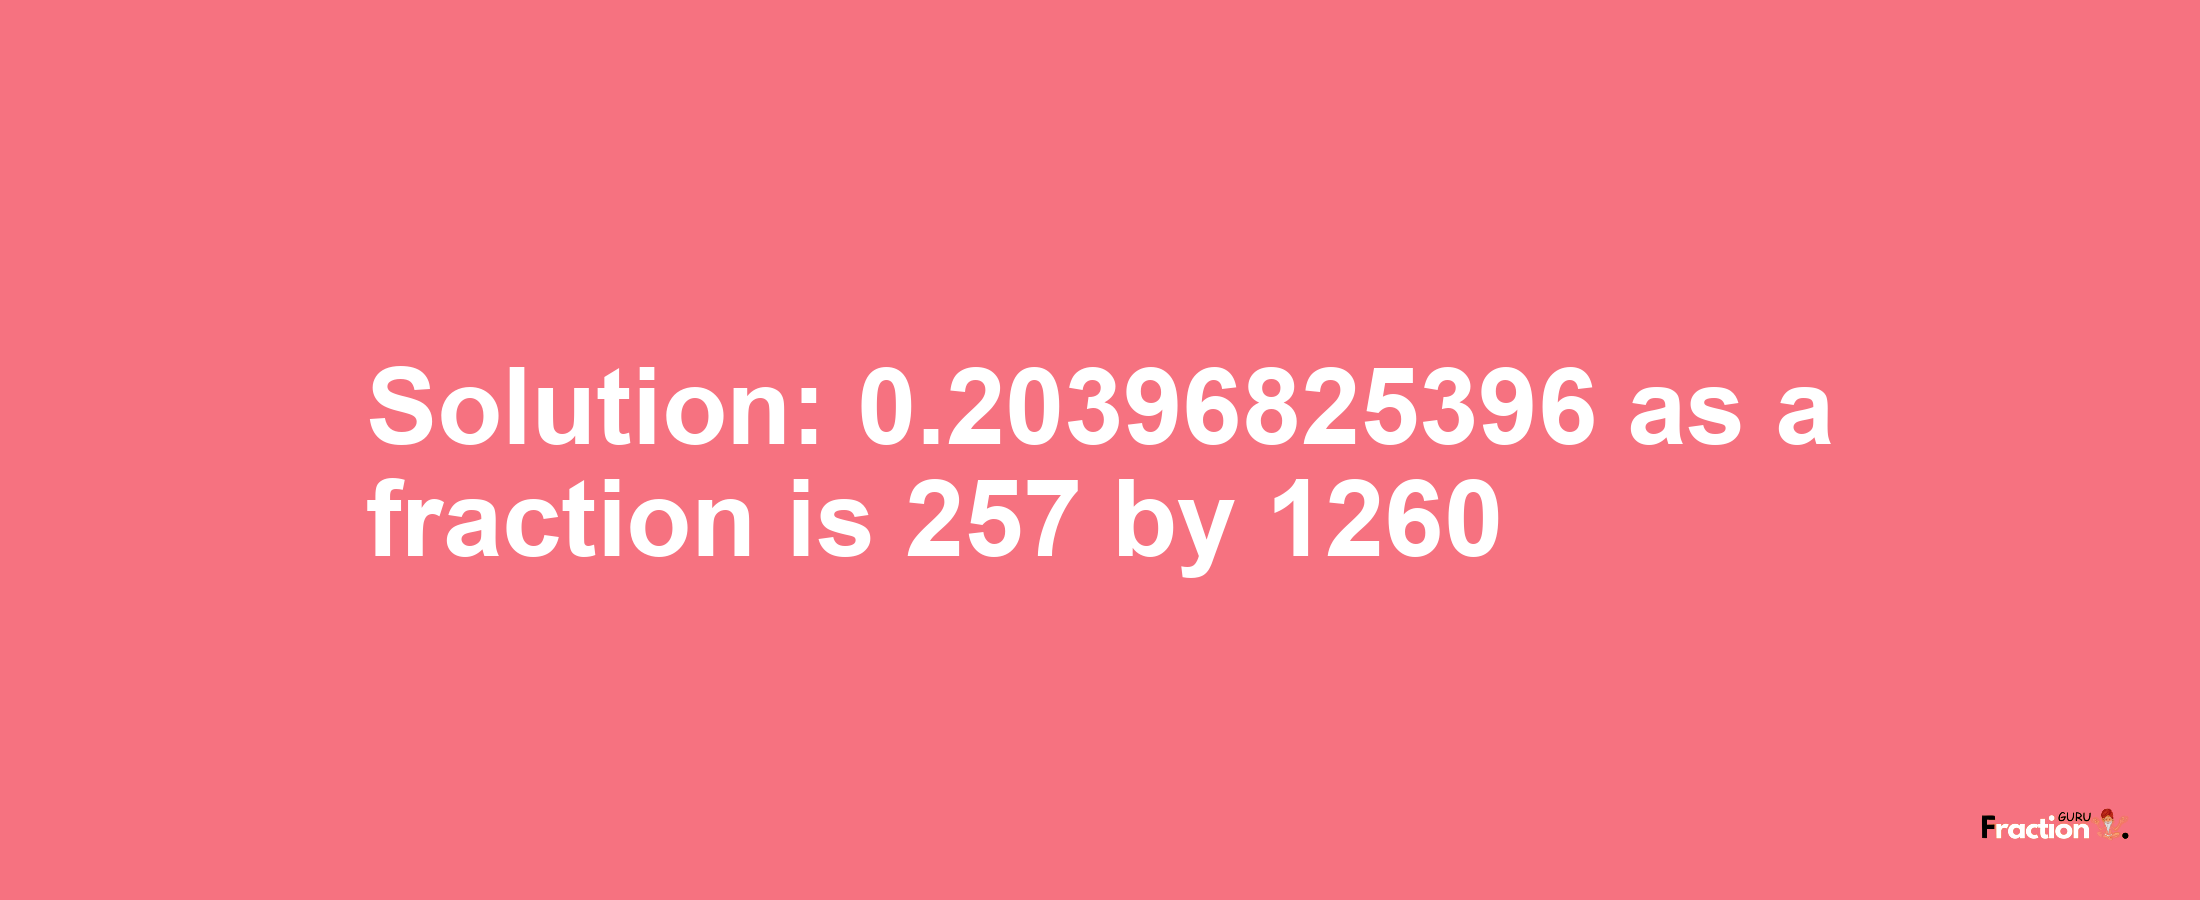 Solution:0.20396825396 as a fraction is 257/1260